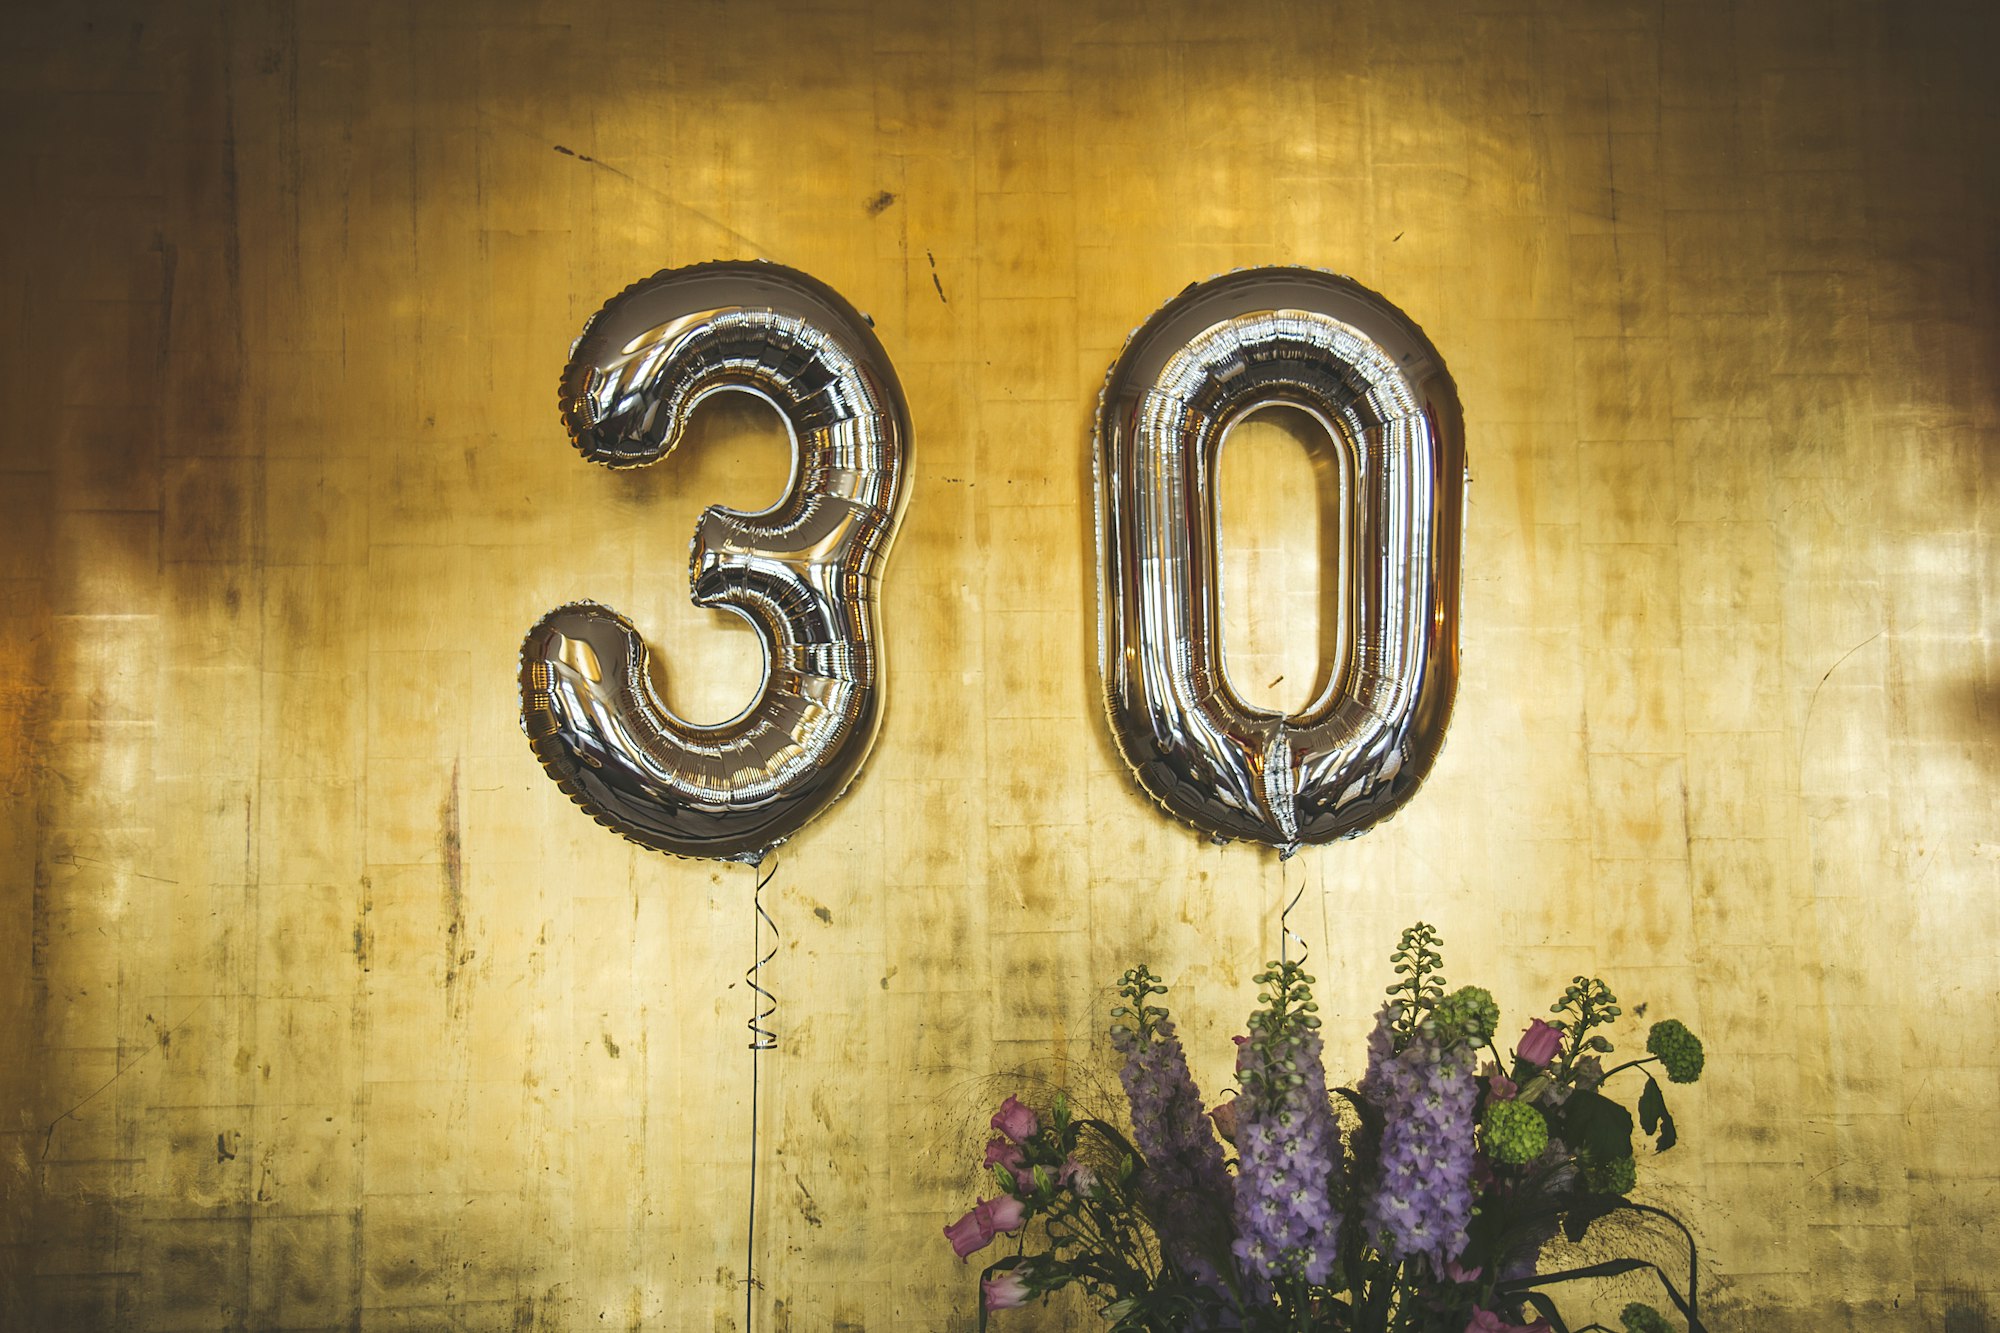 30 things I've learned in 30 years